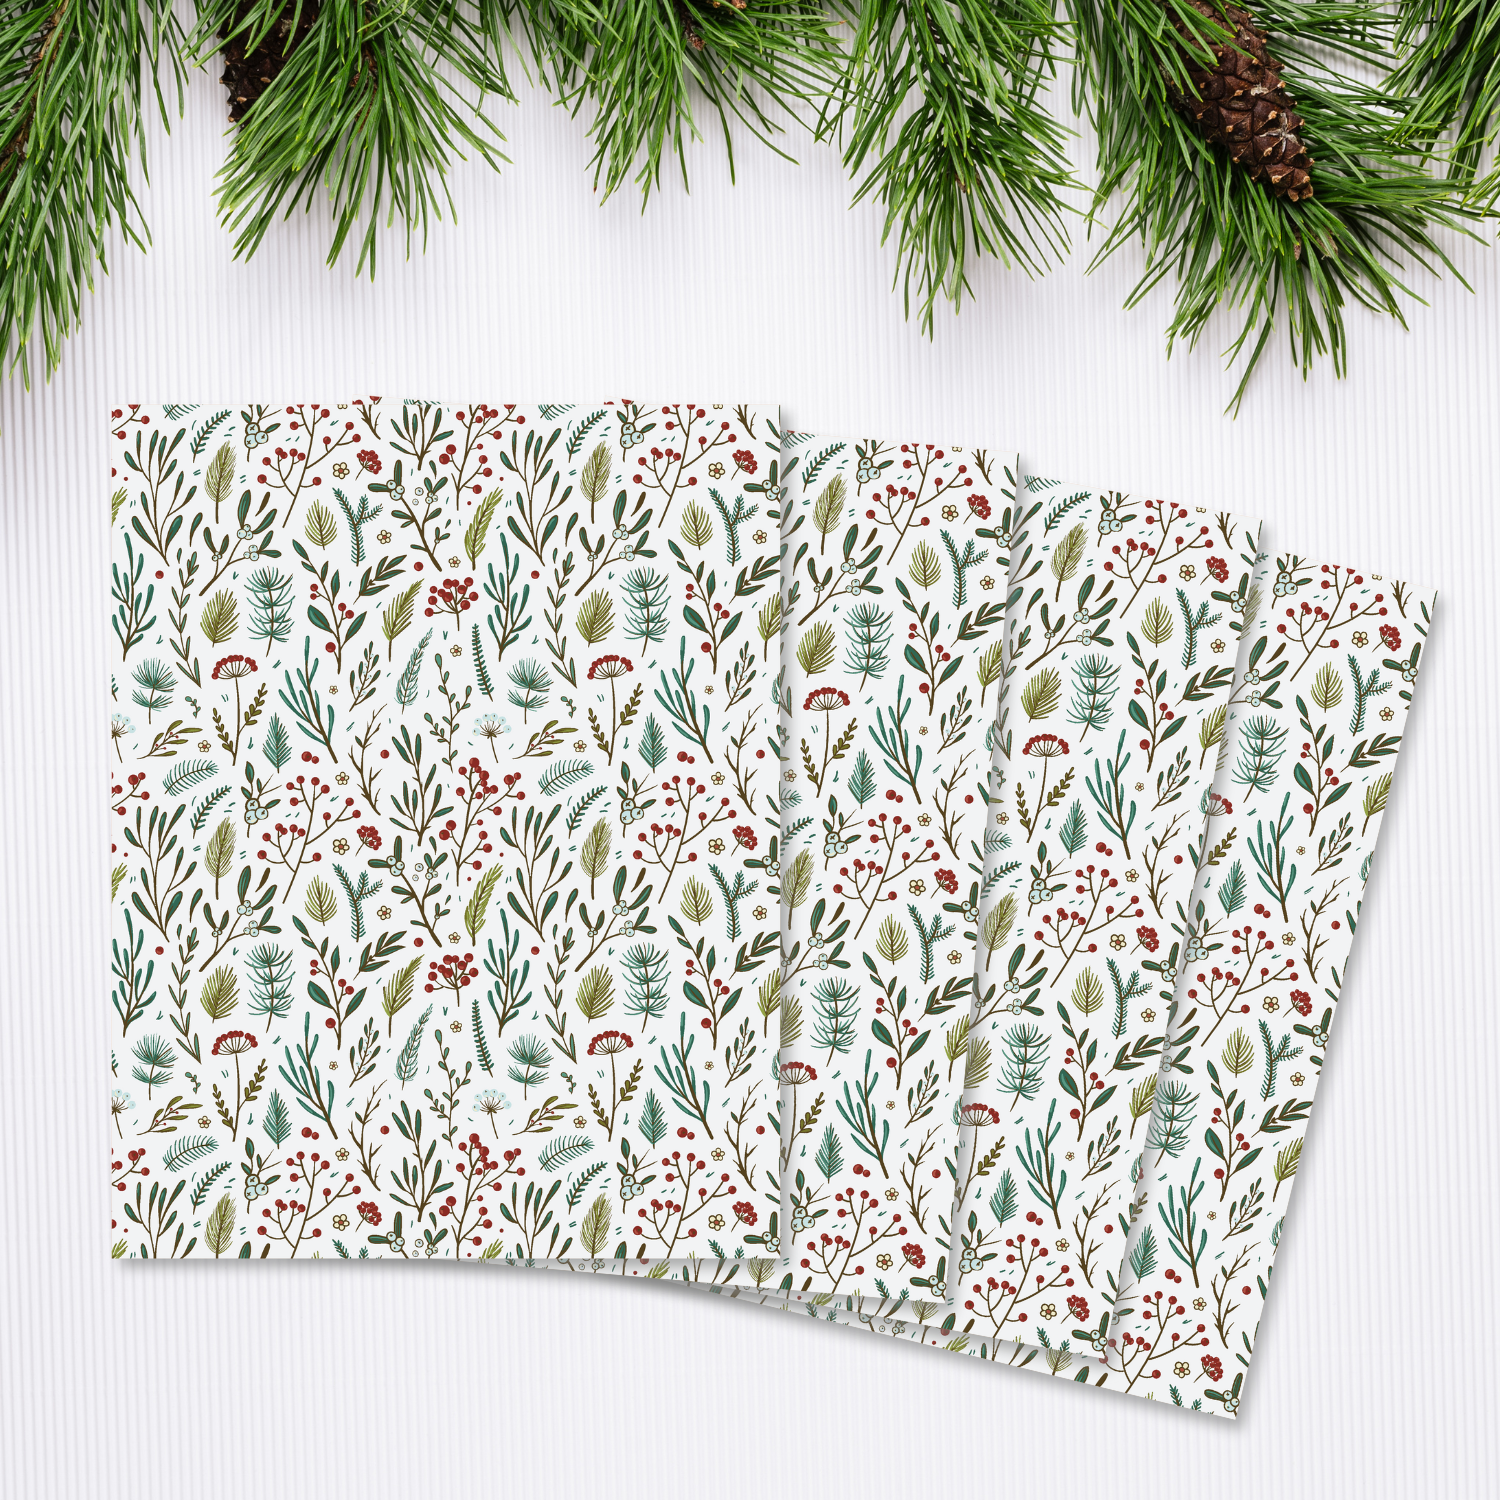 Christmas transfer sheets adorned with floral patterns and pine needles.